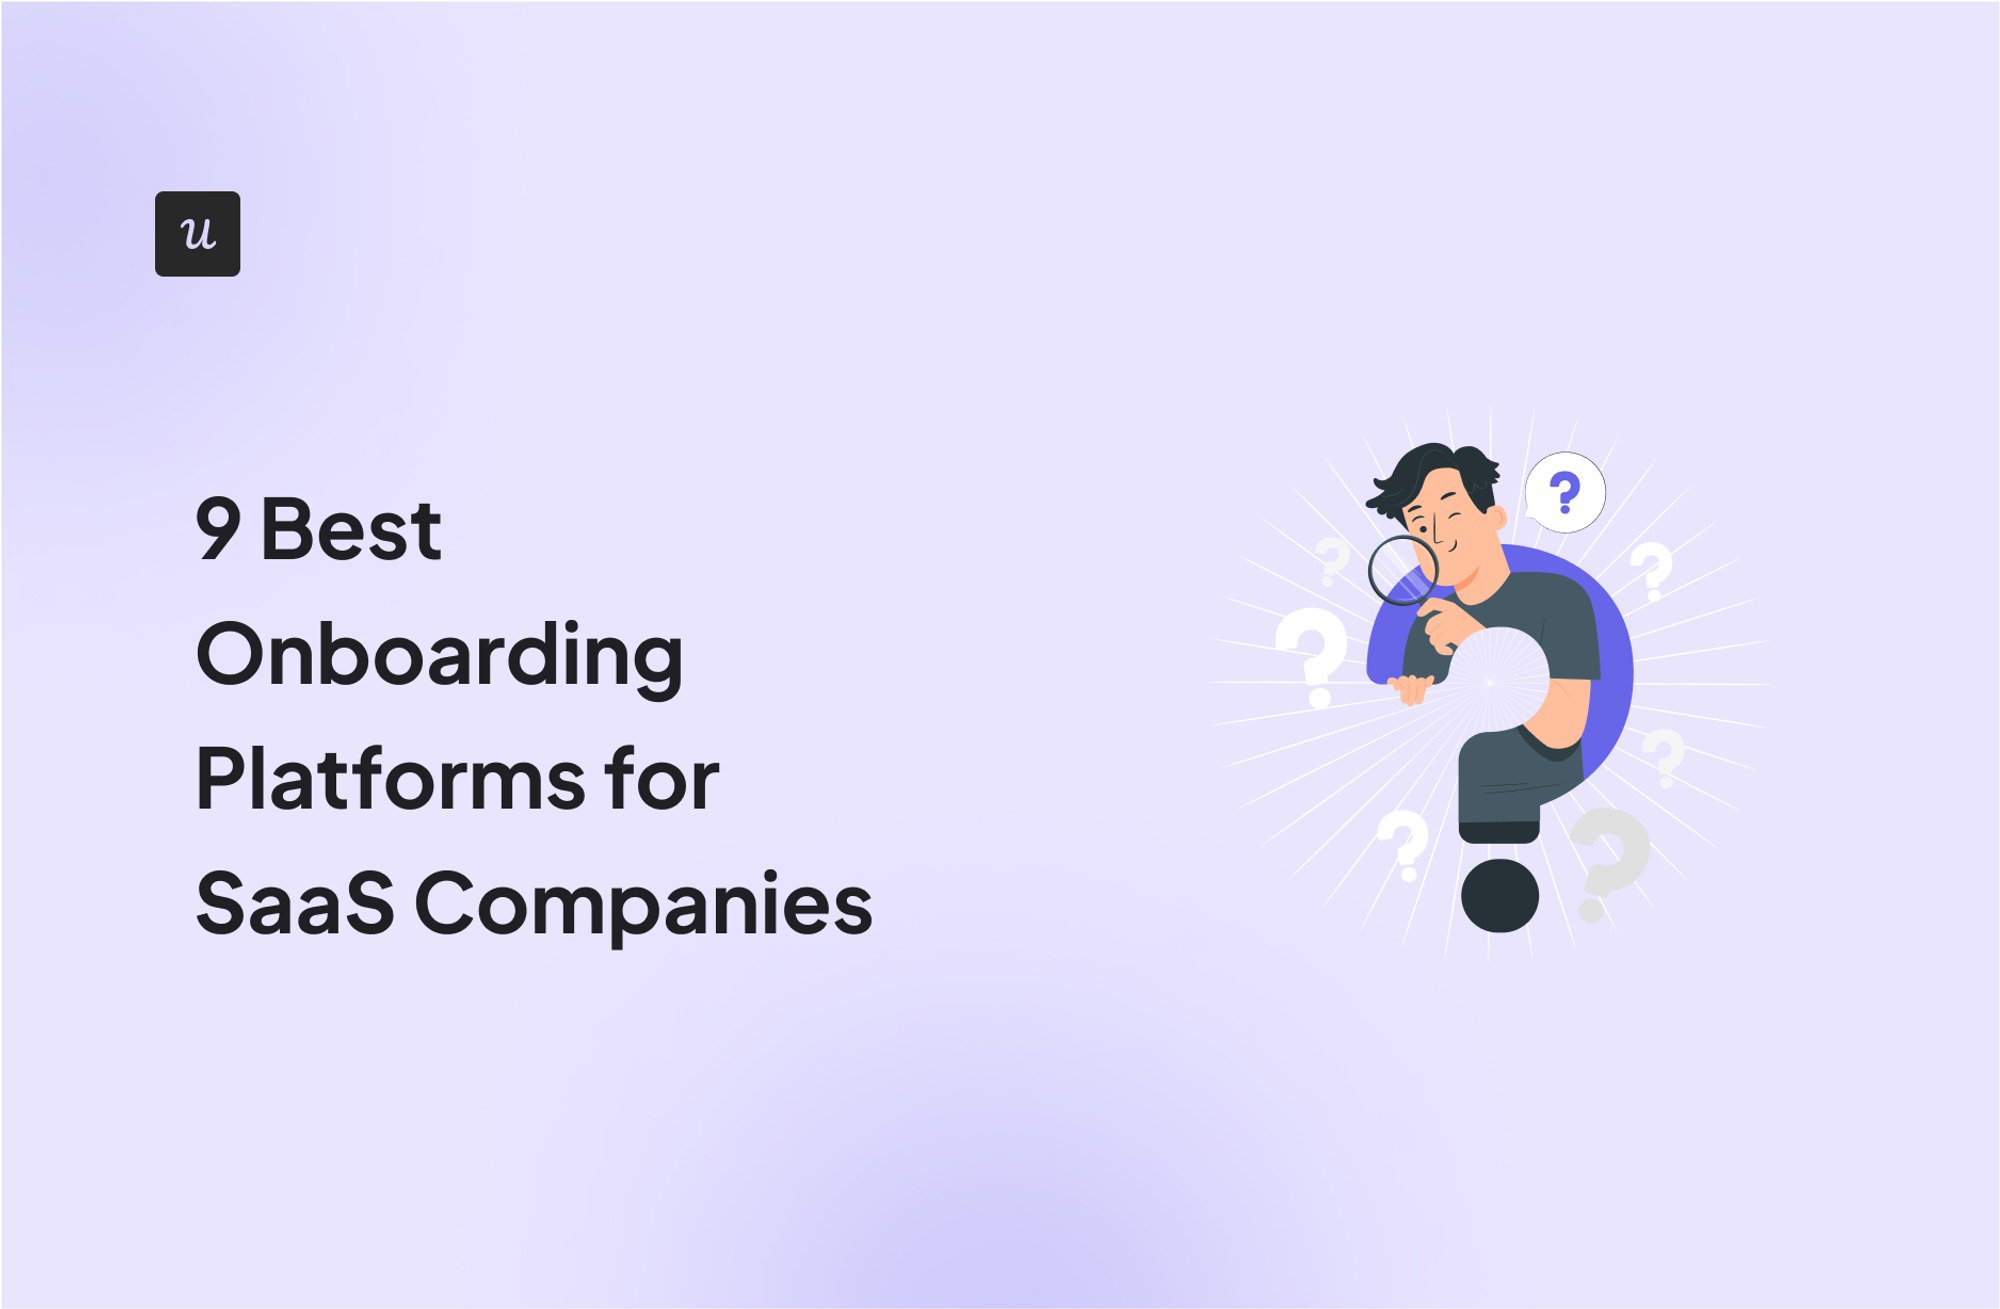 9 Best Onboarding Platforms for SaaS Companies cover